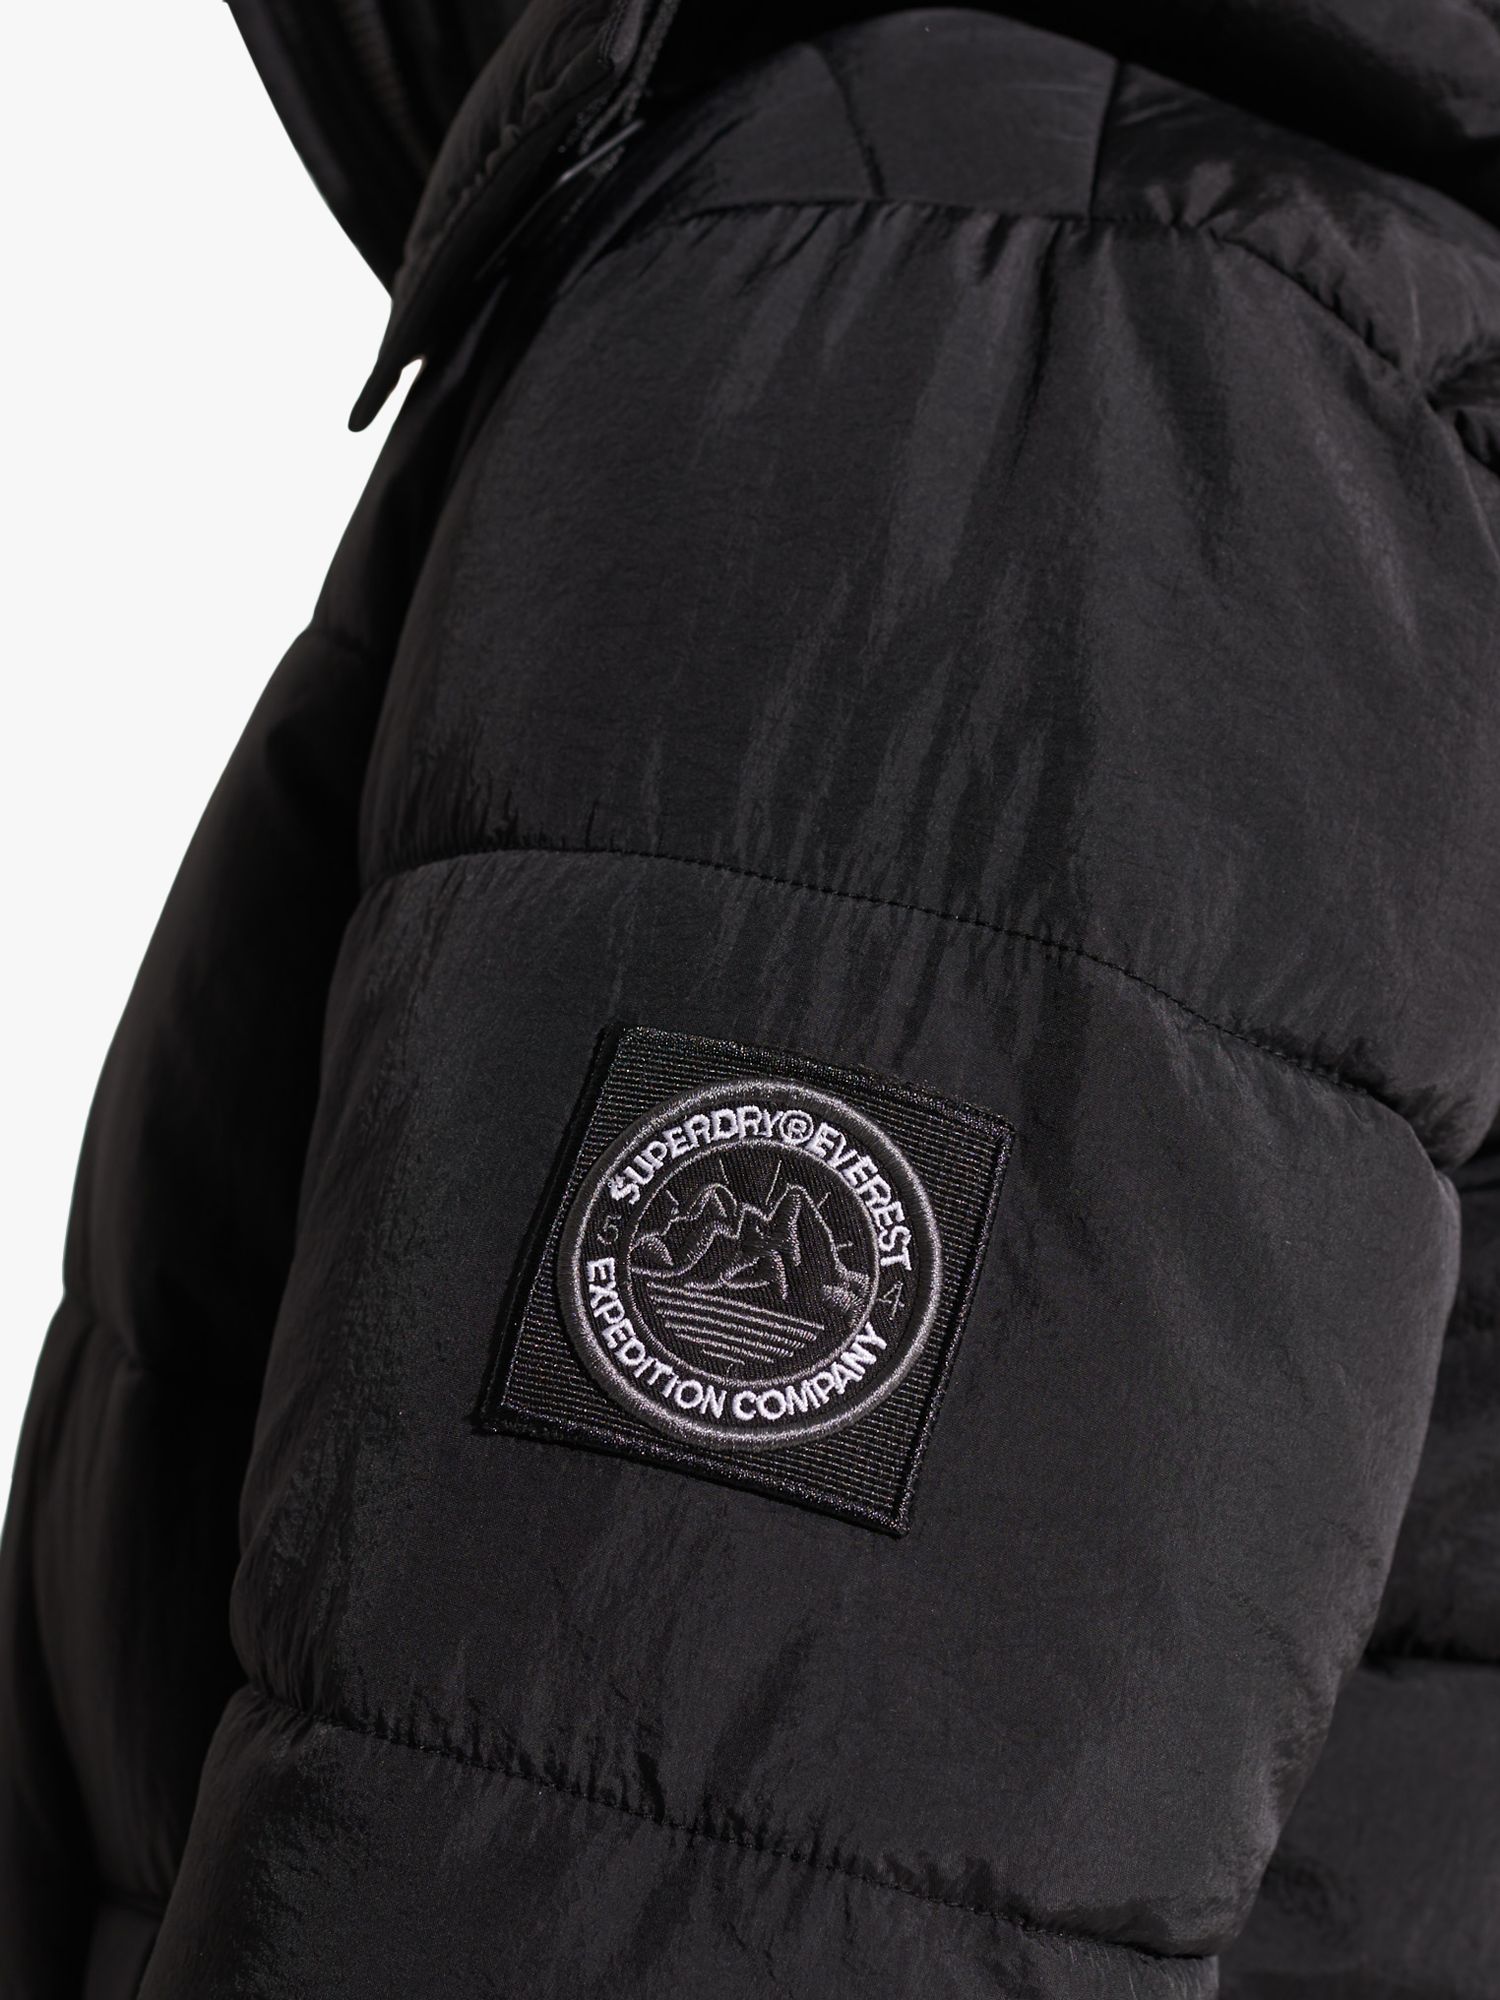 Superdry Expedition Cocoon Padded Coat, Black at John Lewis & Partners